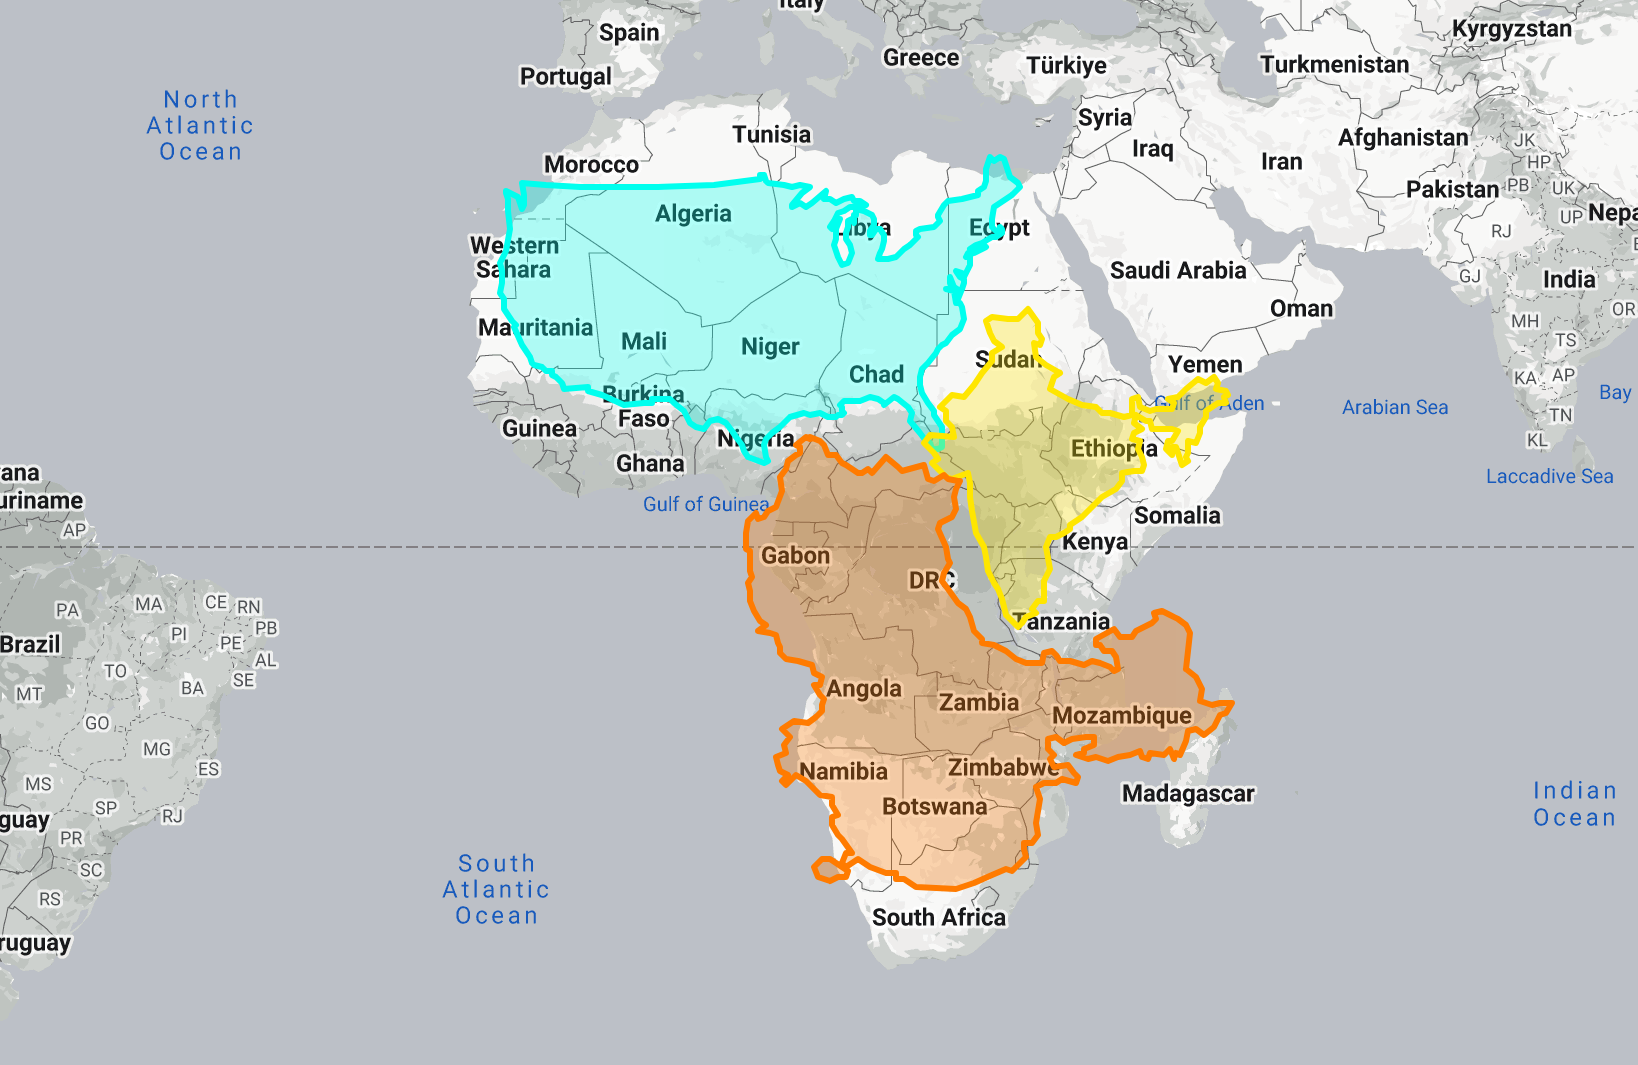 the true size of Africa